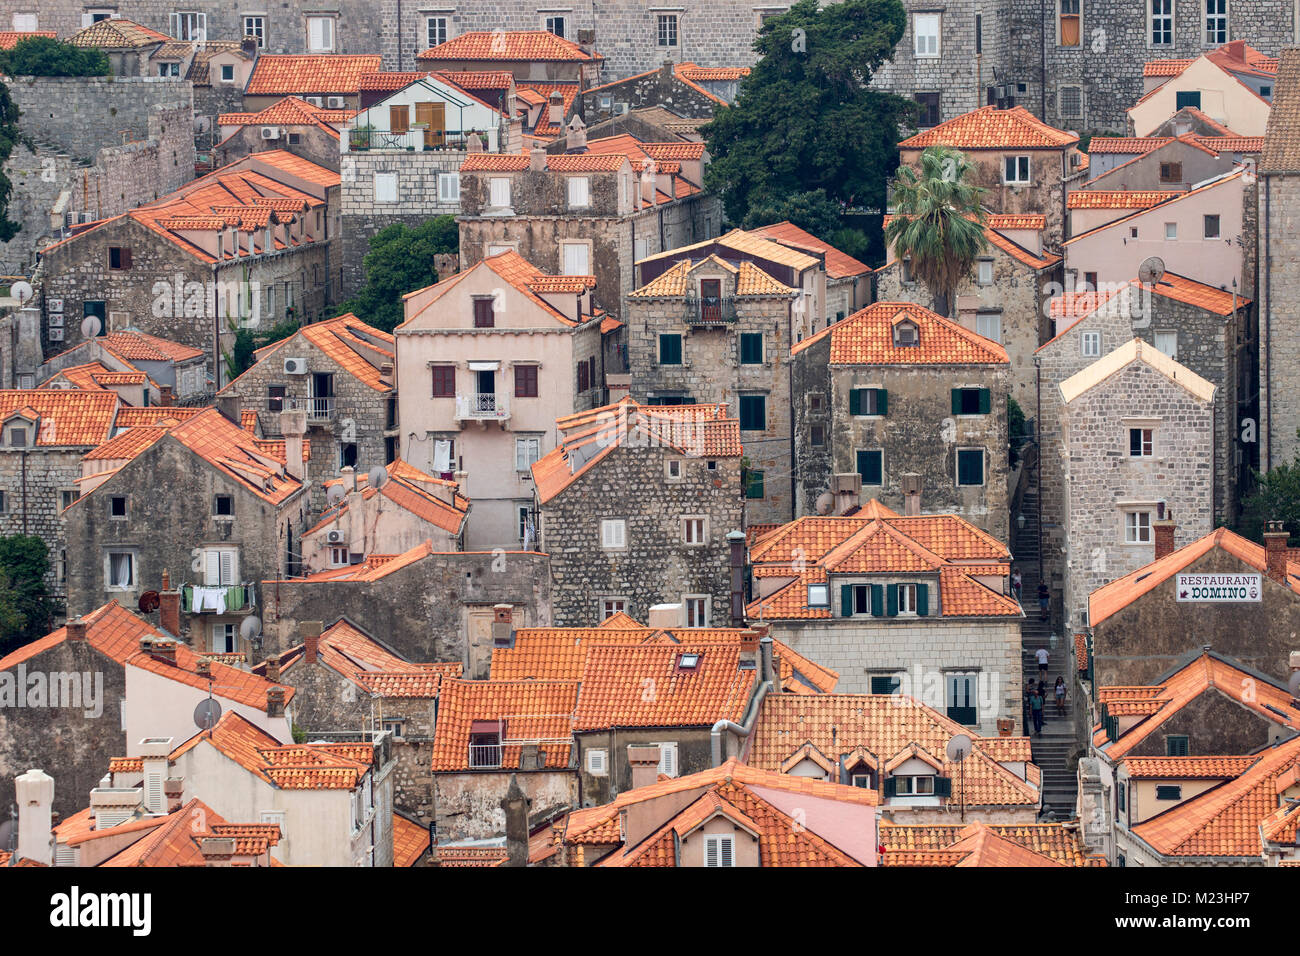 Dubrovnik Old Town view from castle walls, Croatia Stock Photo